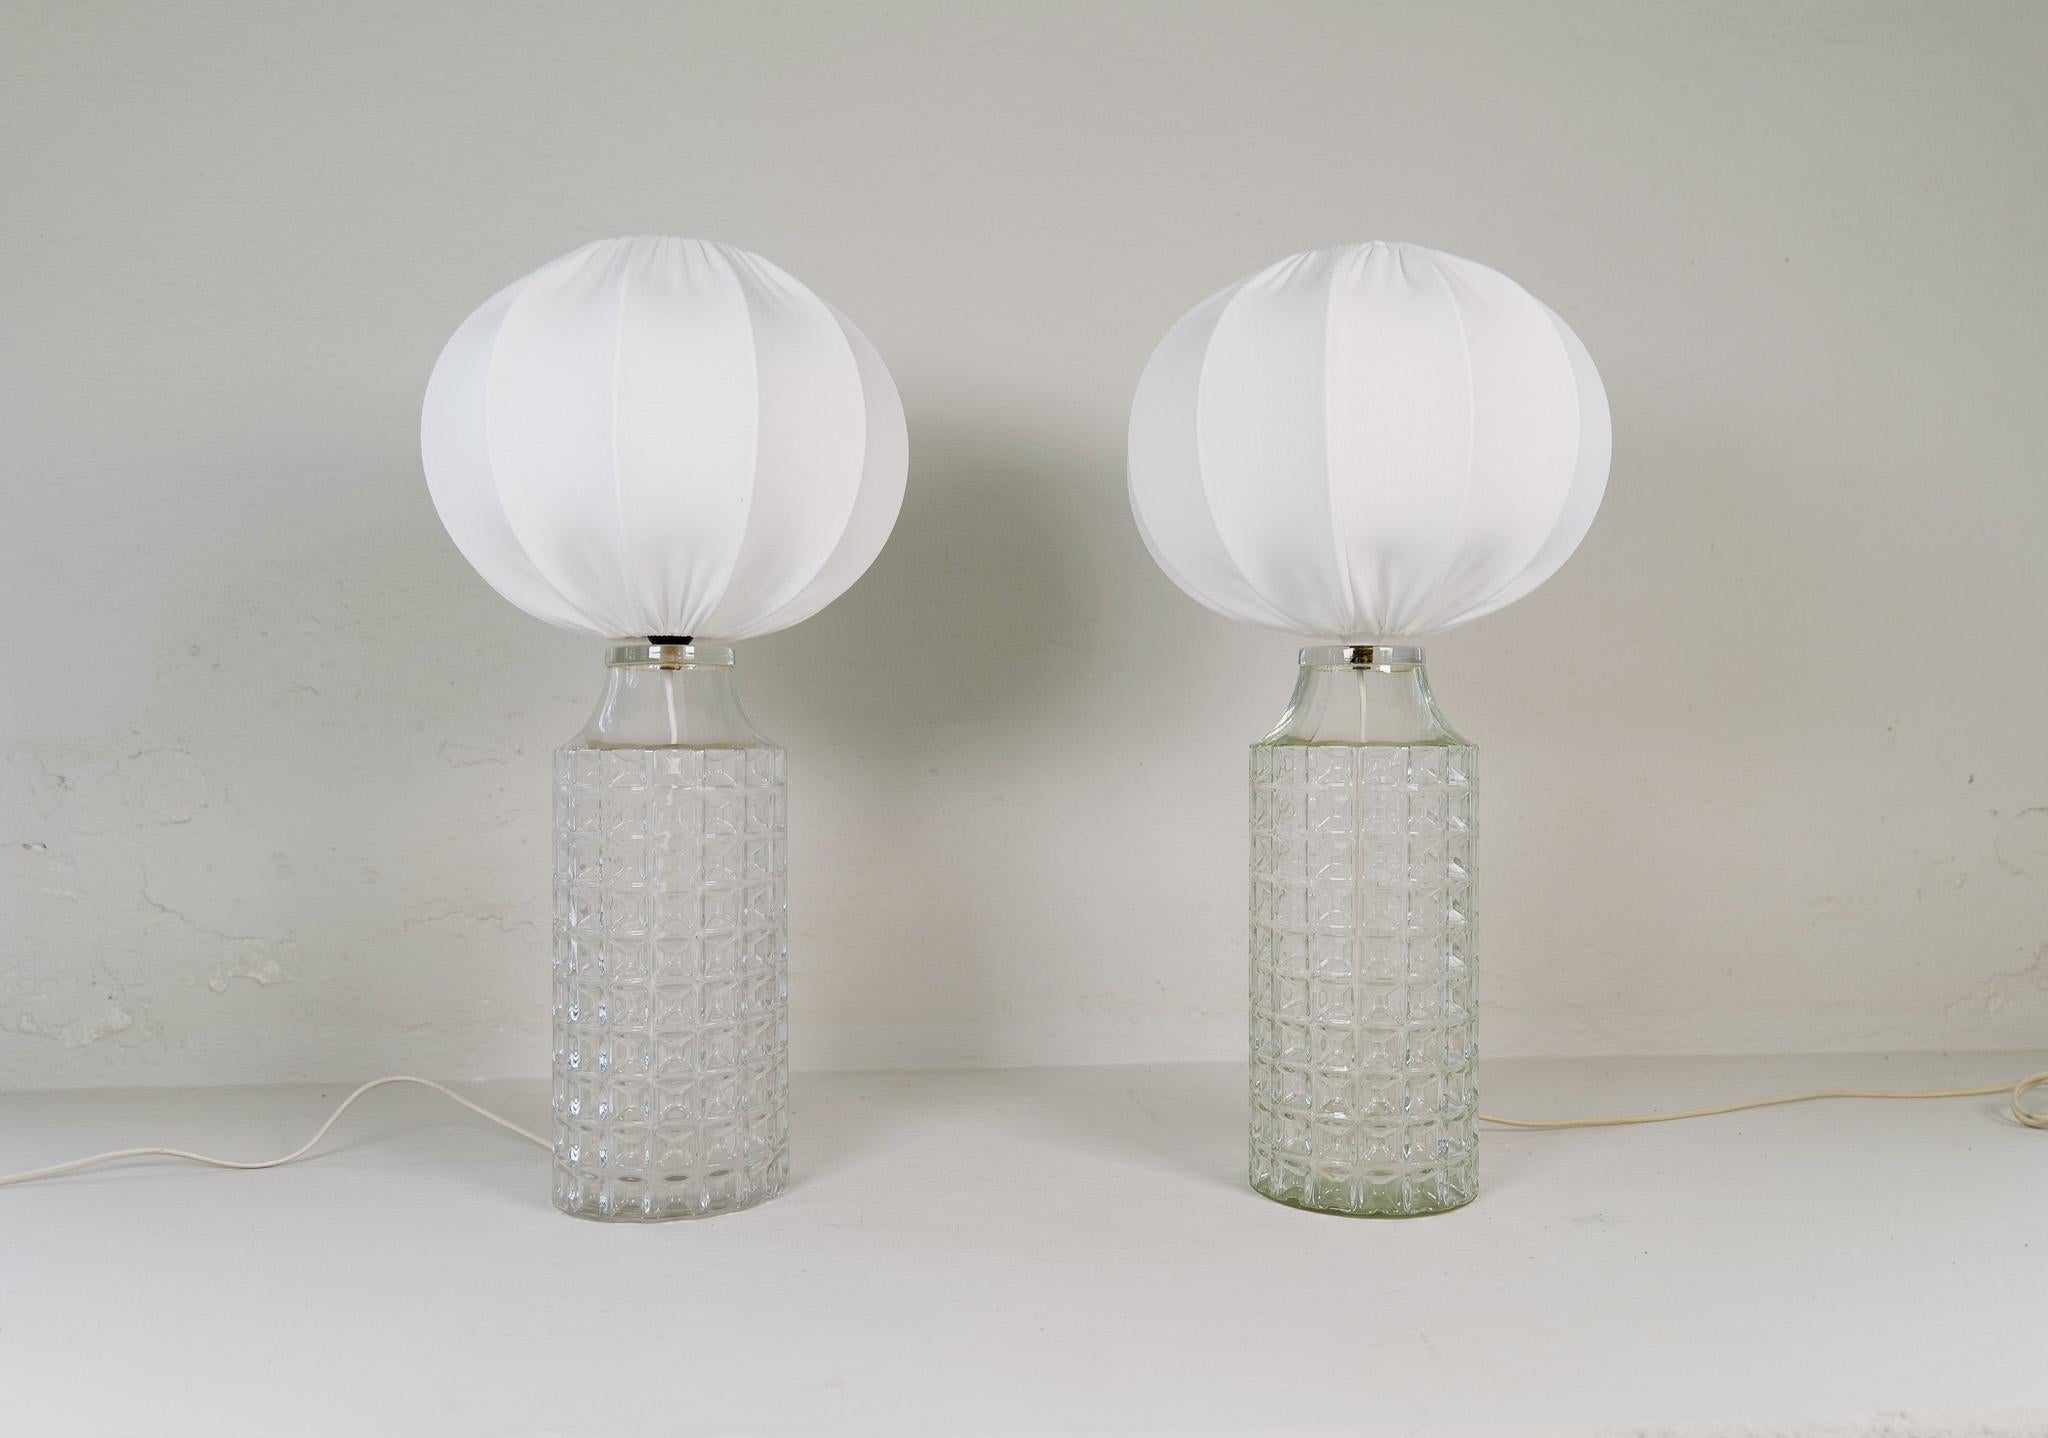 Midcentury large and rare modern table lamps design by Carl Fagerlund for Orrefors Glasbruk in Sweden.
The scuplural glass with an all-new cotton shades gives a great modern look. 

Good condition.

Dimensions: height: 23.6 in (60 cm), width: 7